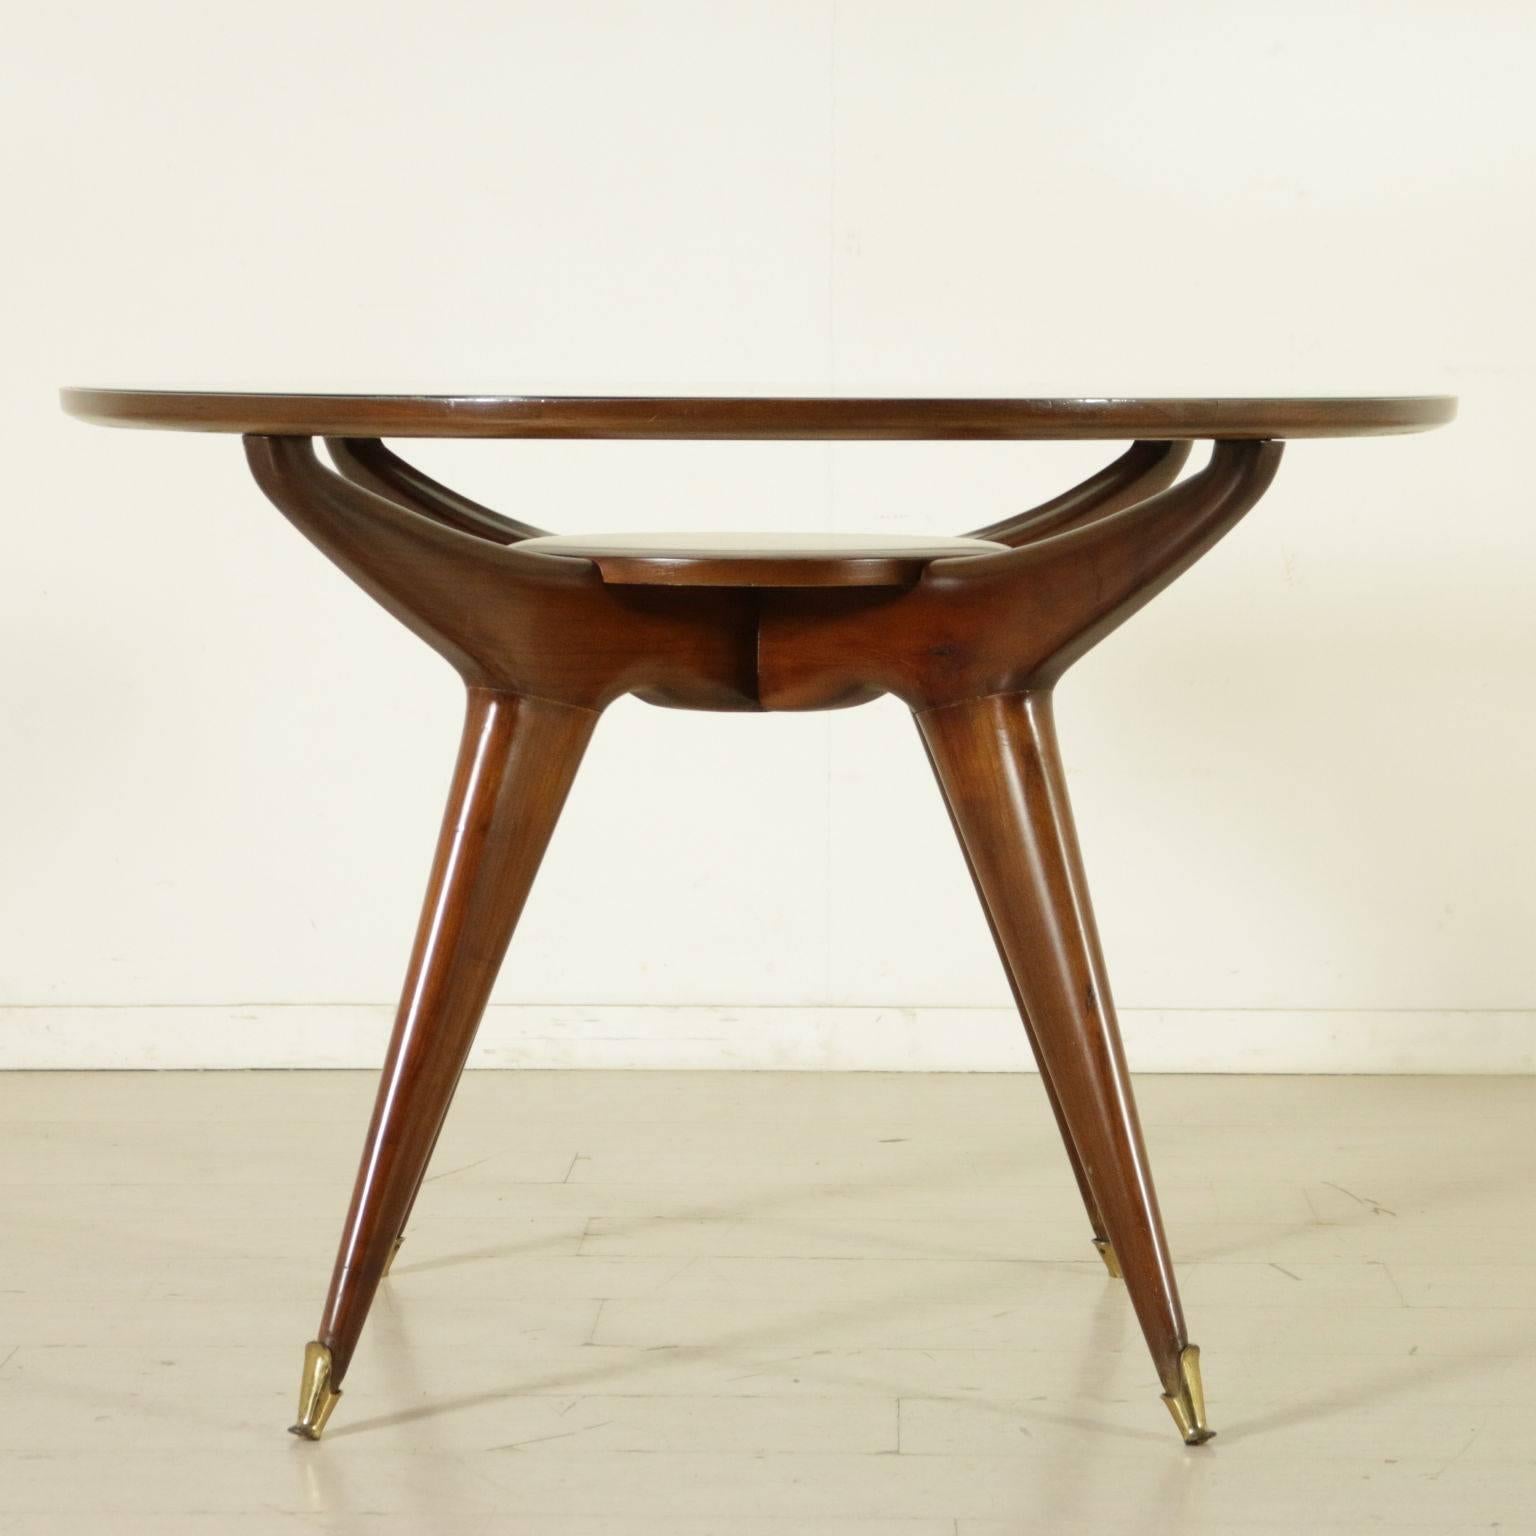 A round table designed by the architect Gambarelli. Beech and rosewood basement, transparent glass top with retro treated band, brass ferrules. Manufactured in Italy, 1958.